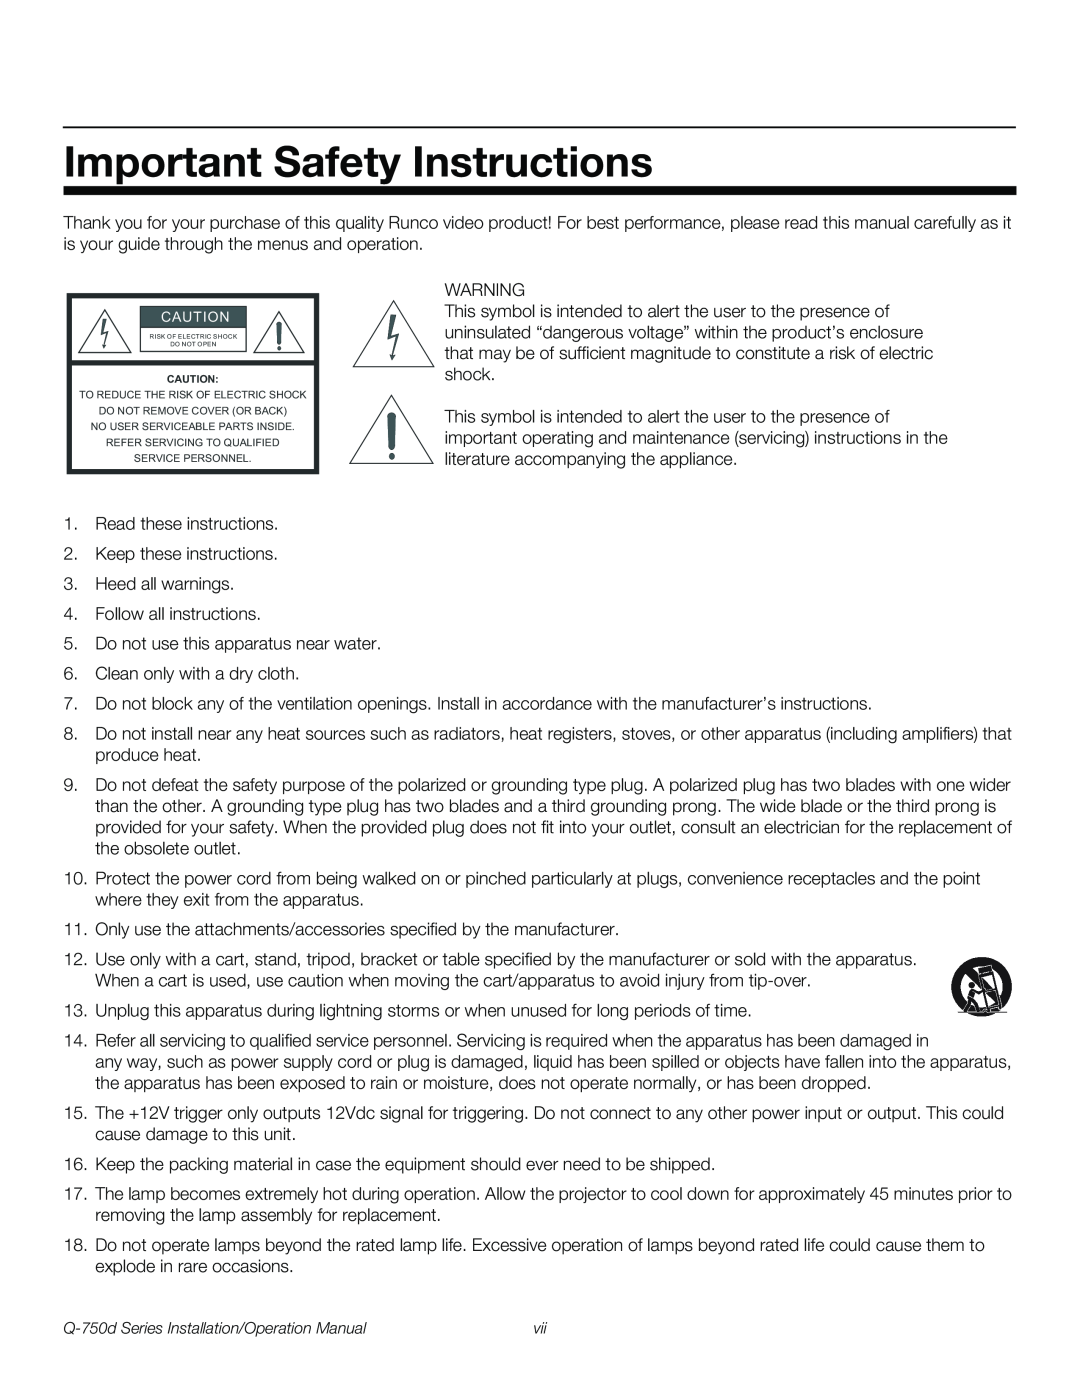 Runco Q-750D operation manual Important Safety Instructions 